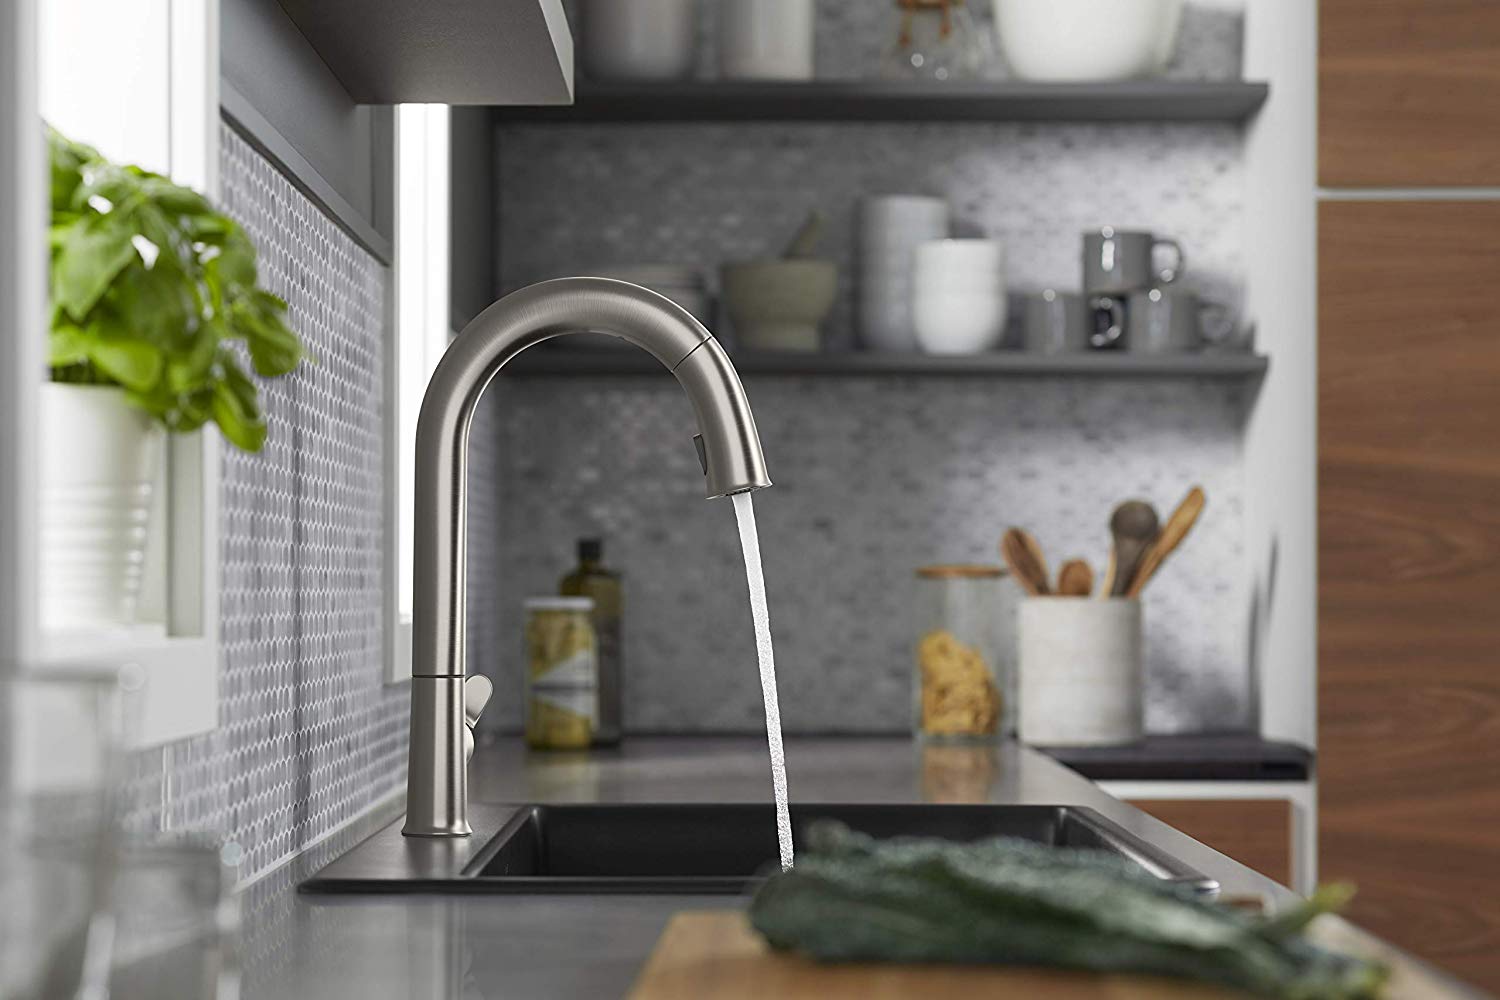 High-tech faucet upgrades to get you flowing into the future